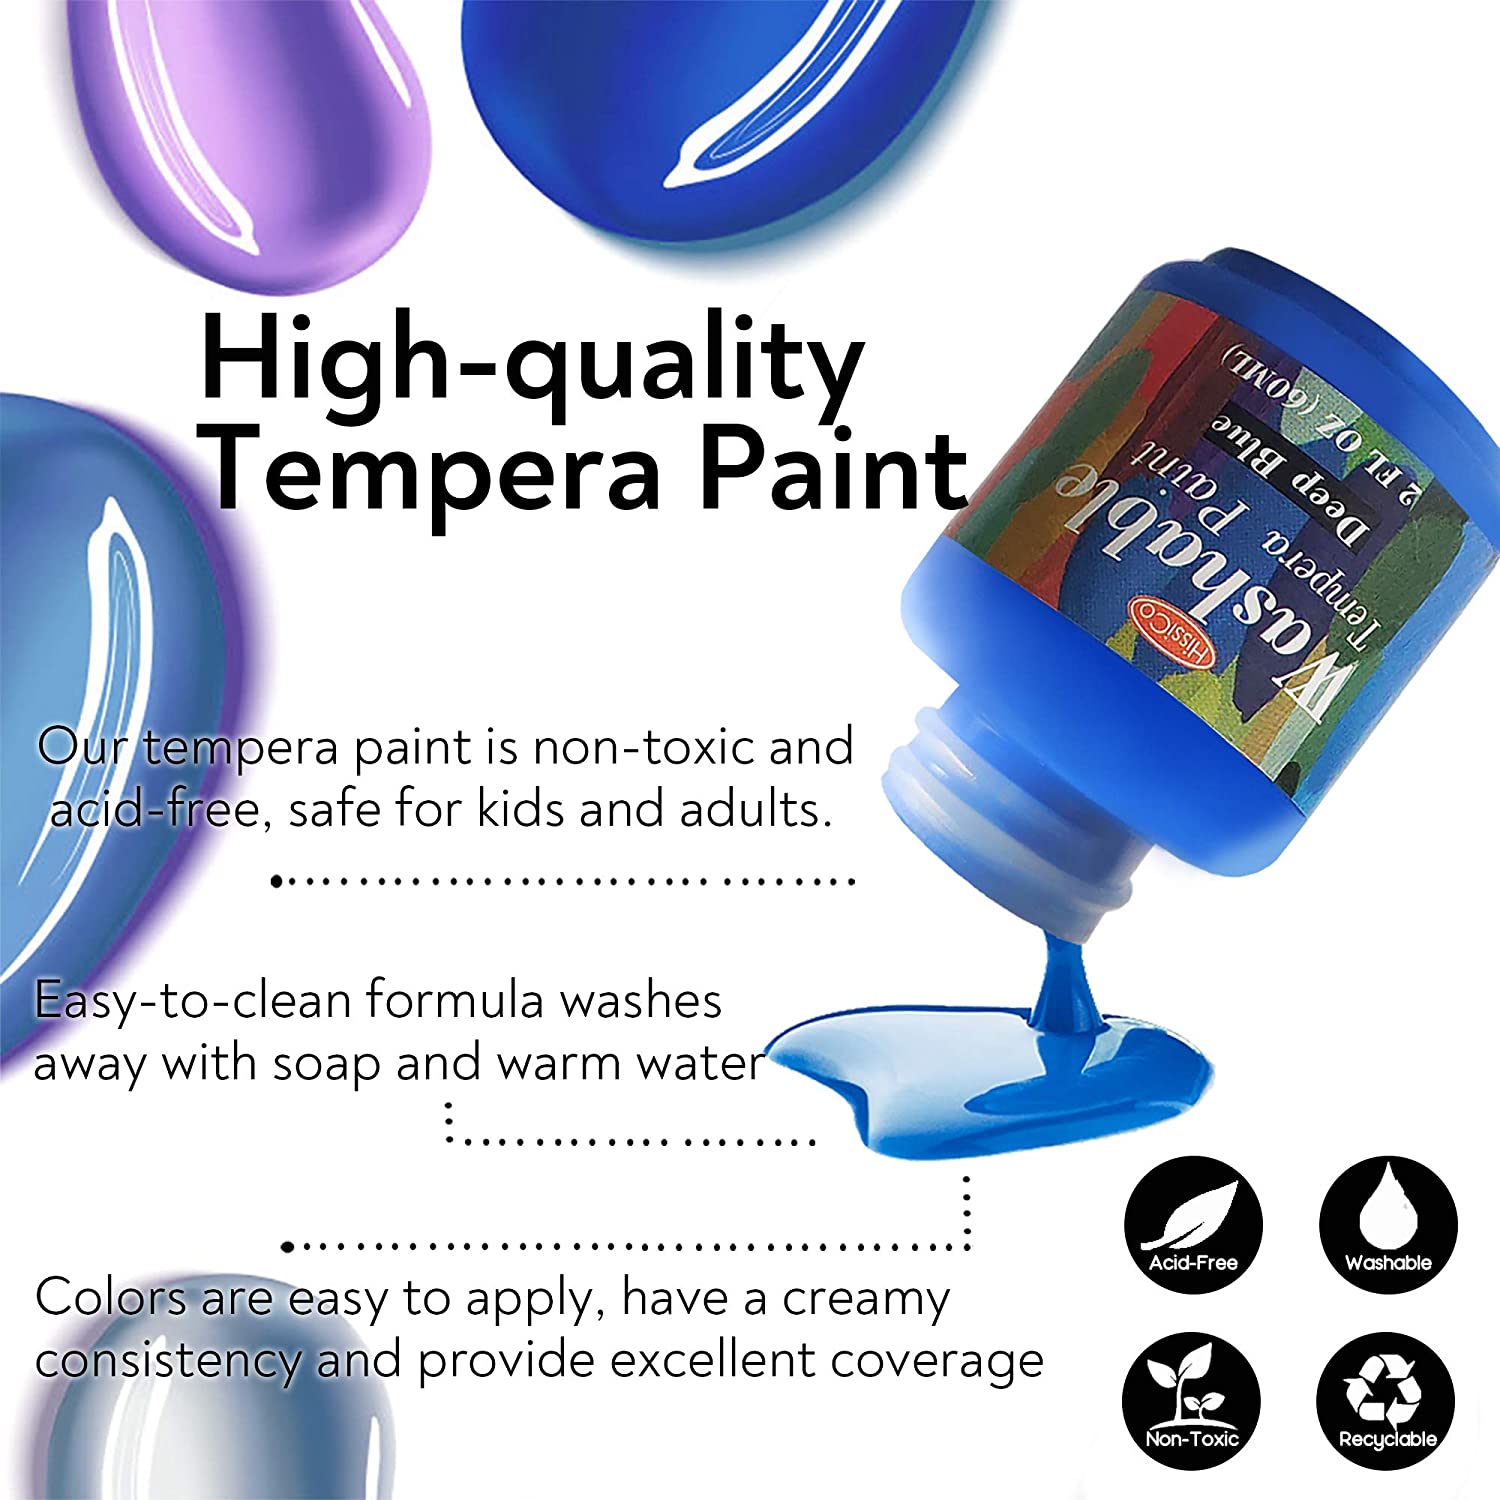 Homkare Washable Tempera Paint for Kids, 12 Colors Poster Paint, Non Toxic  Liquid Kids Washable Paint for Poster, Sponge Painting & Craft Projects